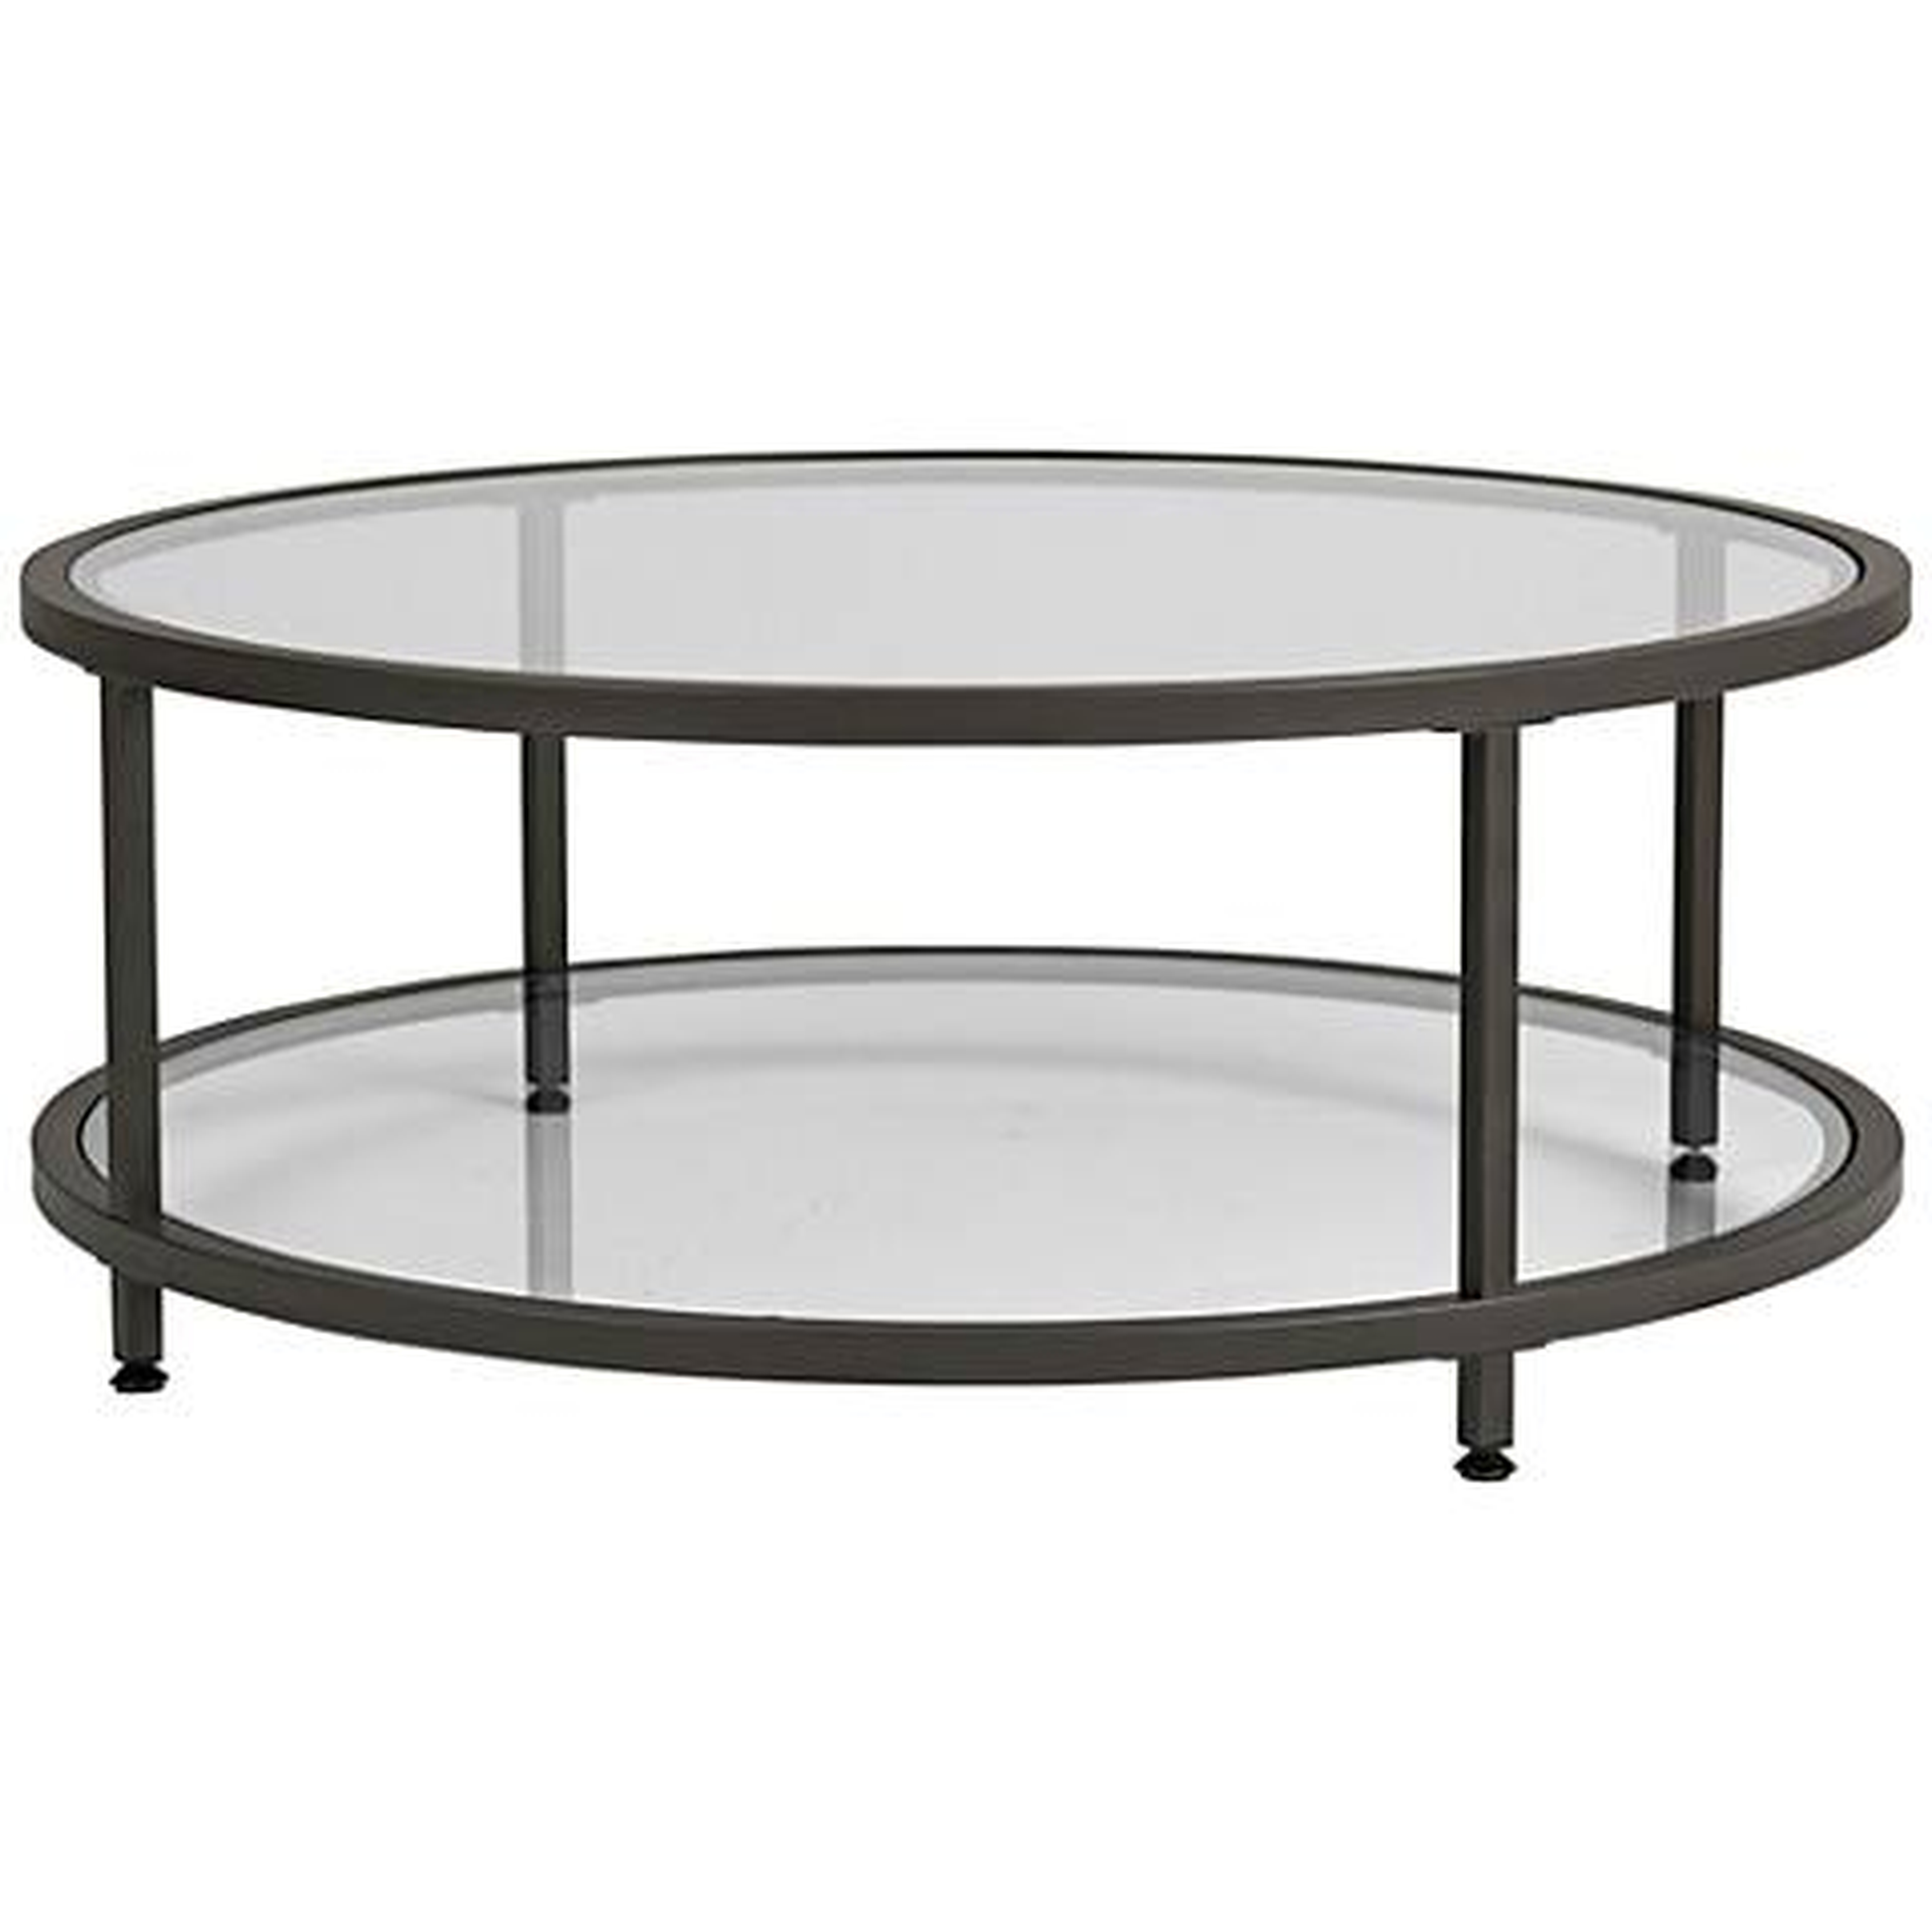 Studio Designs Home Camber Pewter Round Coffee Table clear - Lamps Plus